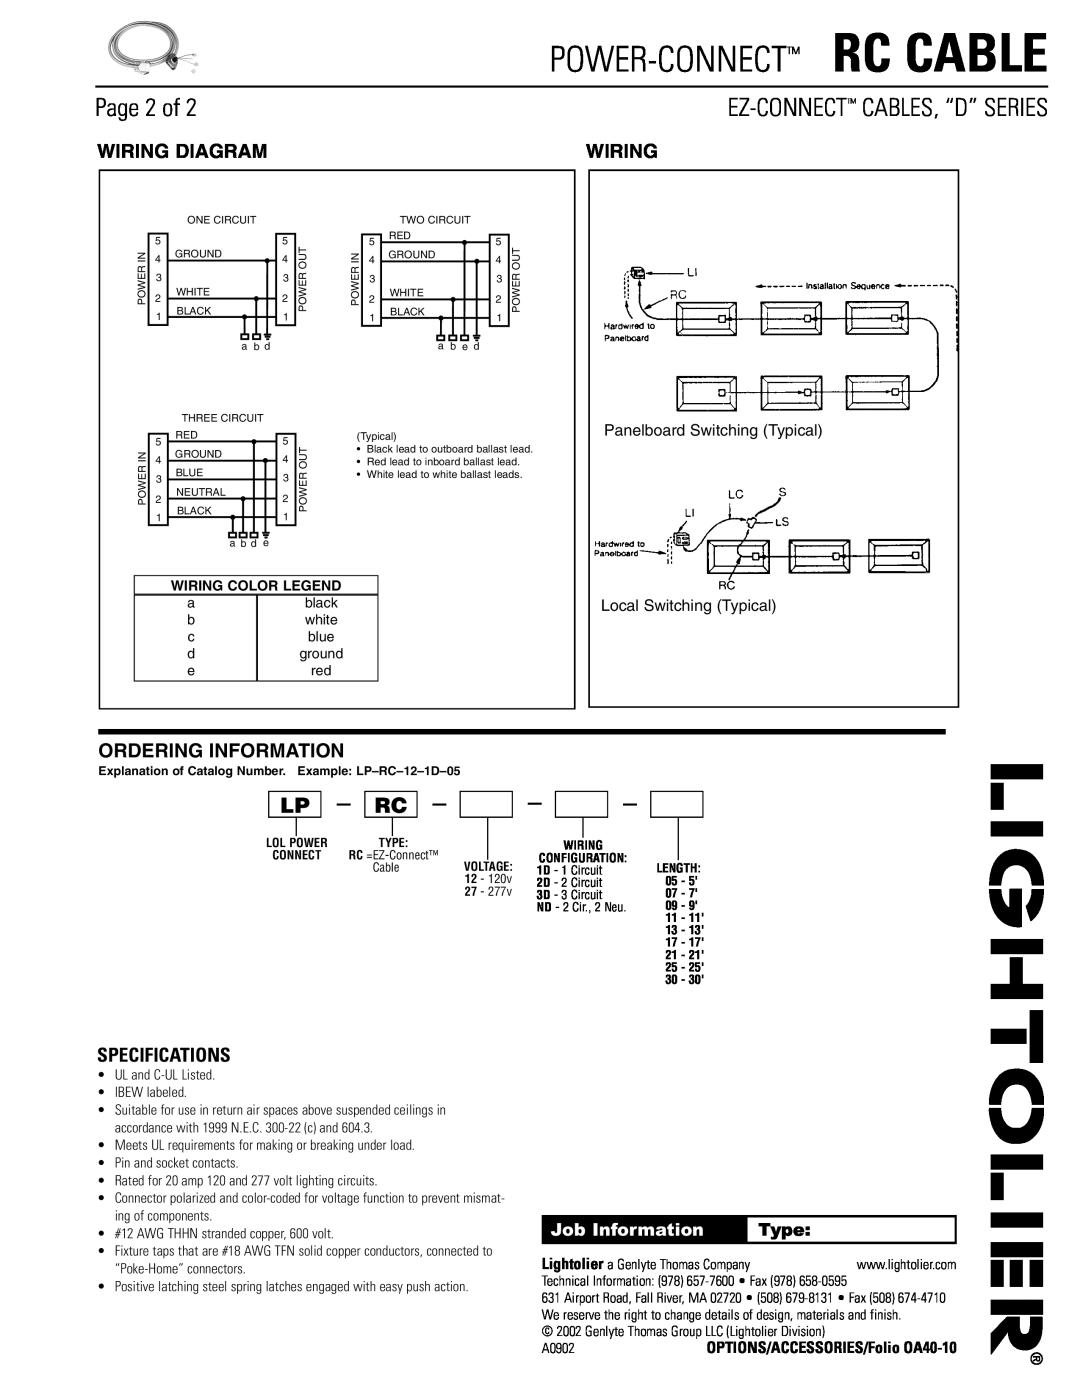 Lightolier D" Series Page 2 of, Ez-Connect Cables, “D” Series, Specifications, Power-Connect Rc Cable, Wiring Diagram 